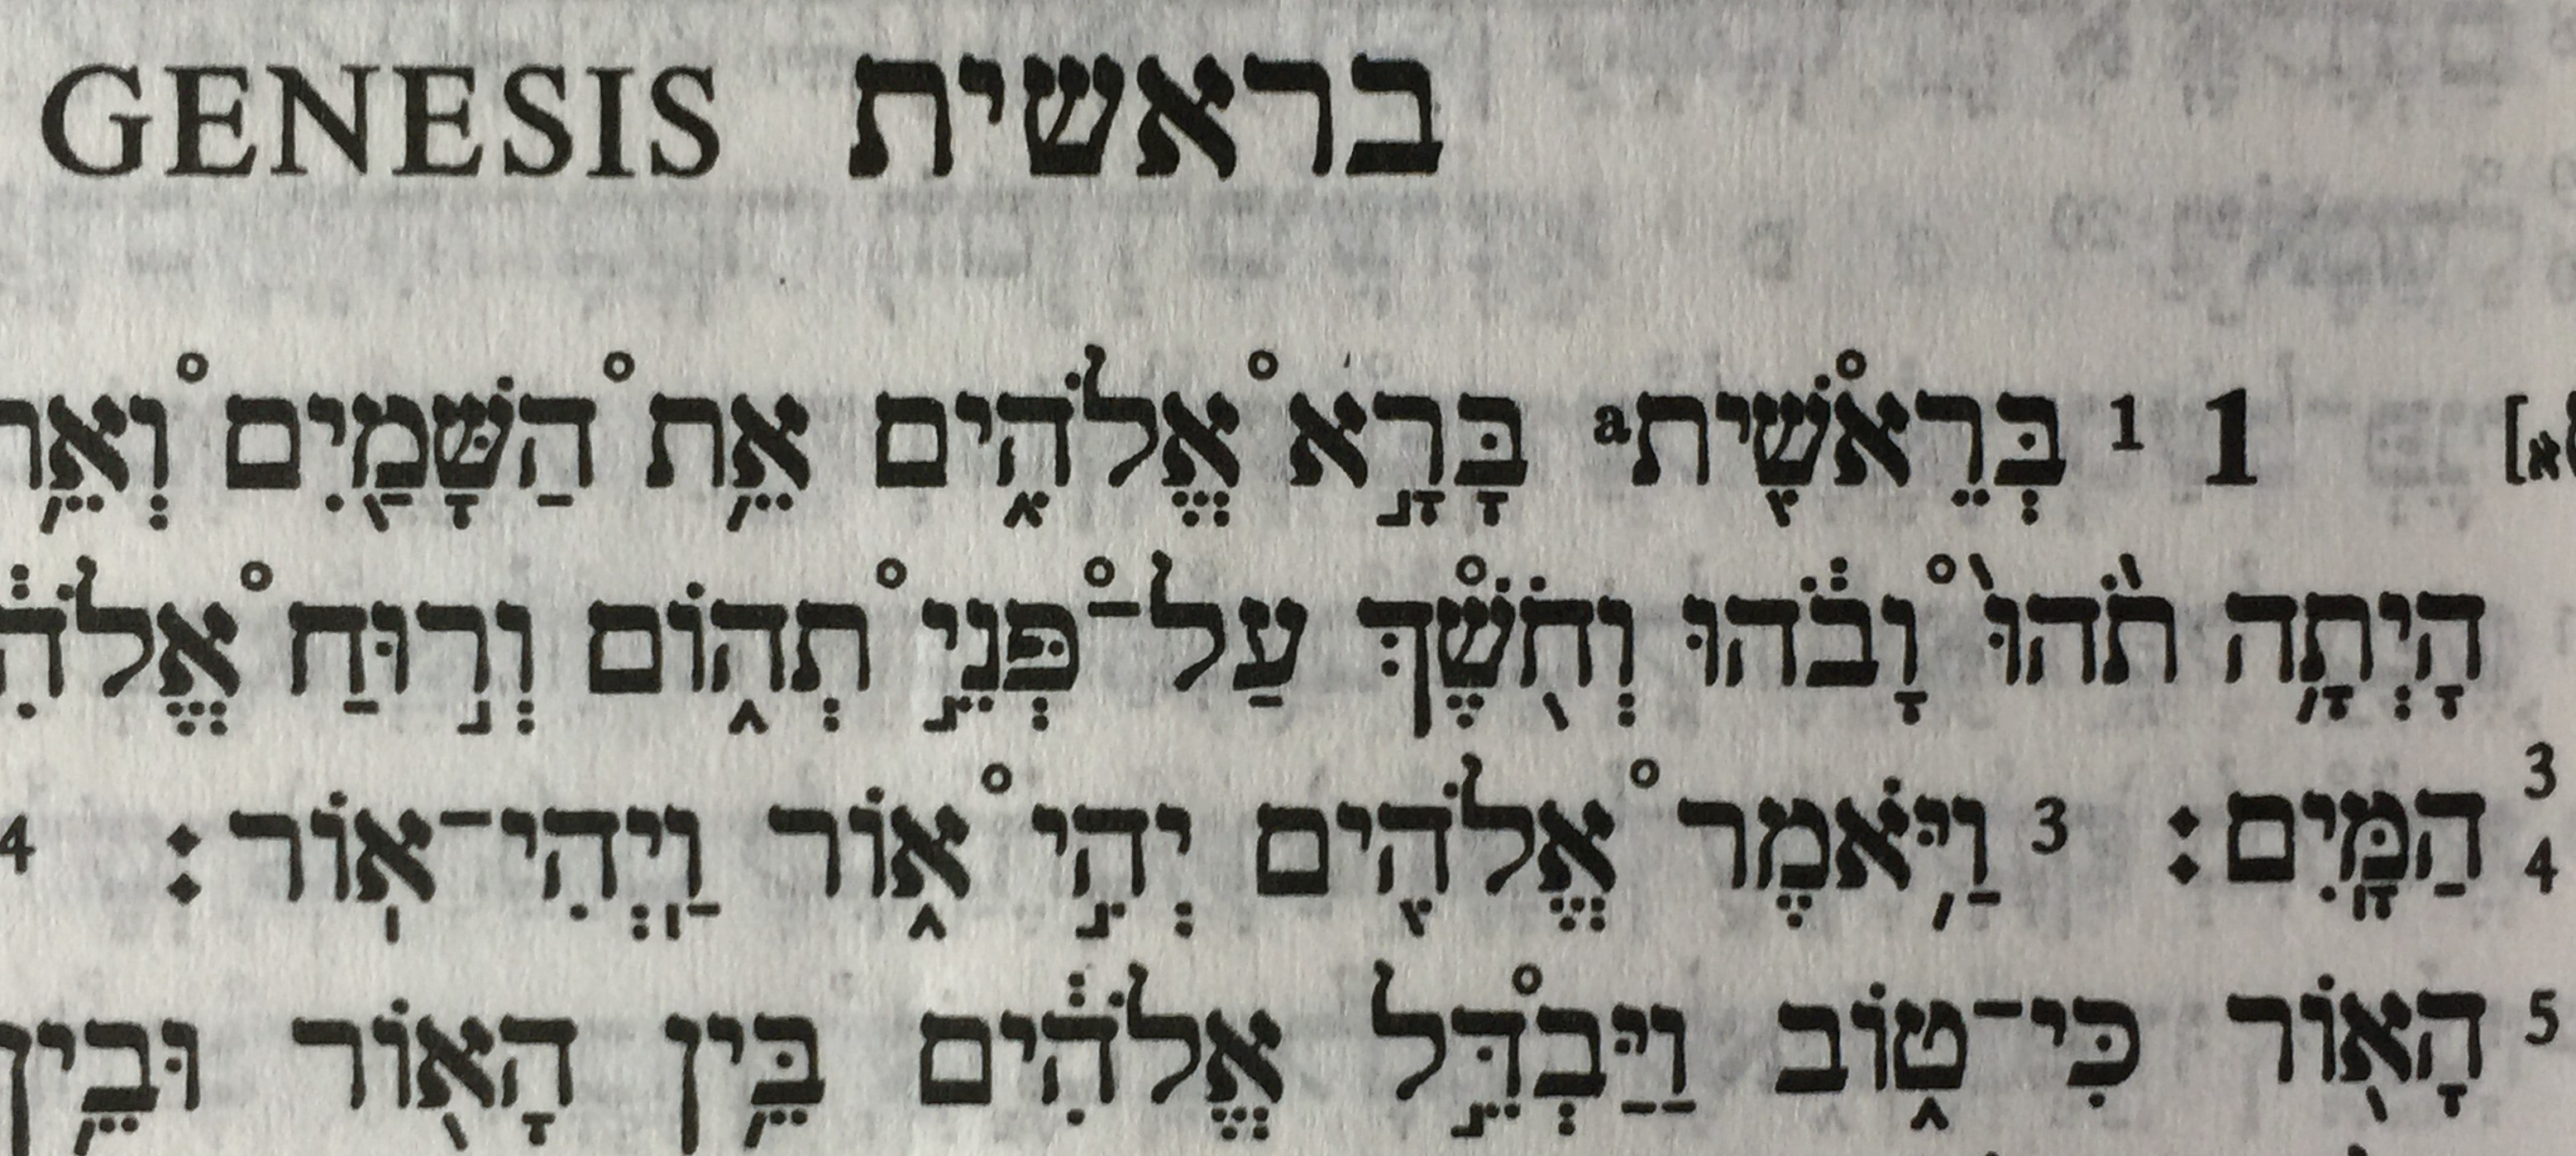 The syntax of Genesis 1:2 allows no gap of time, says a survey of similiar Hebrew examples